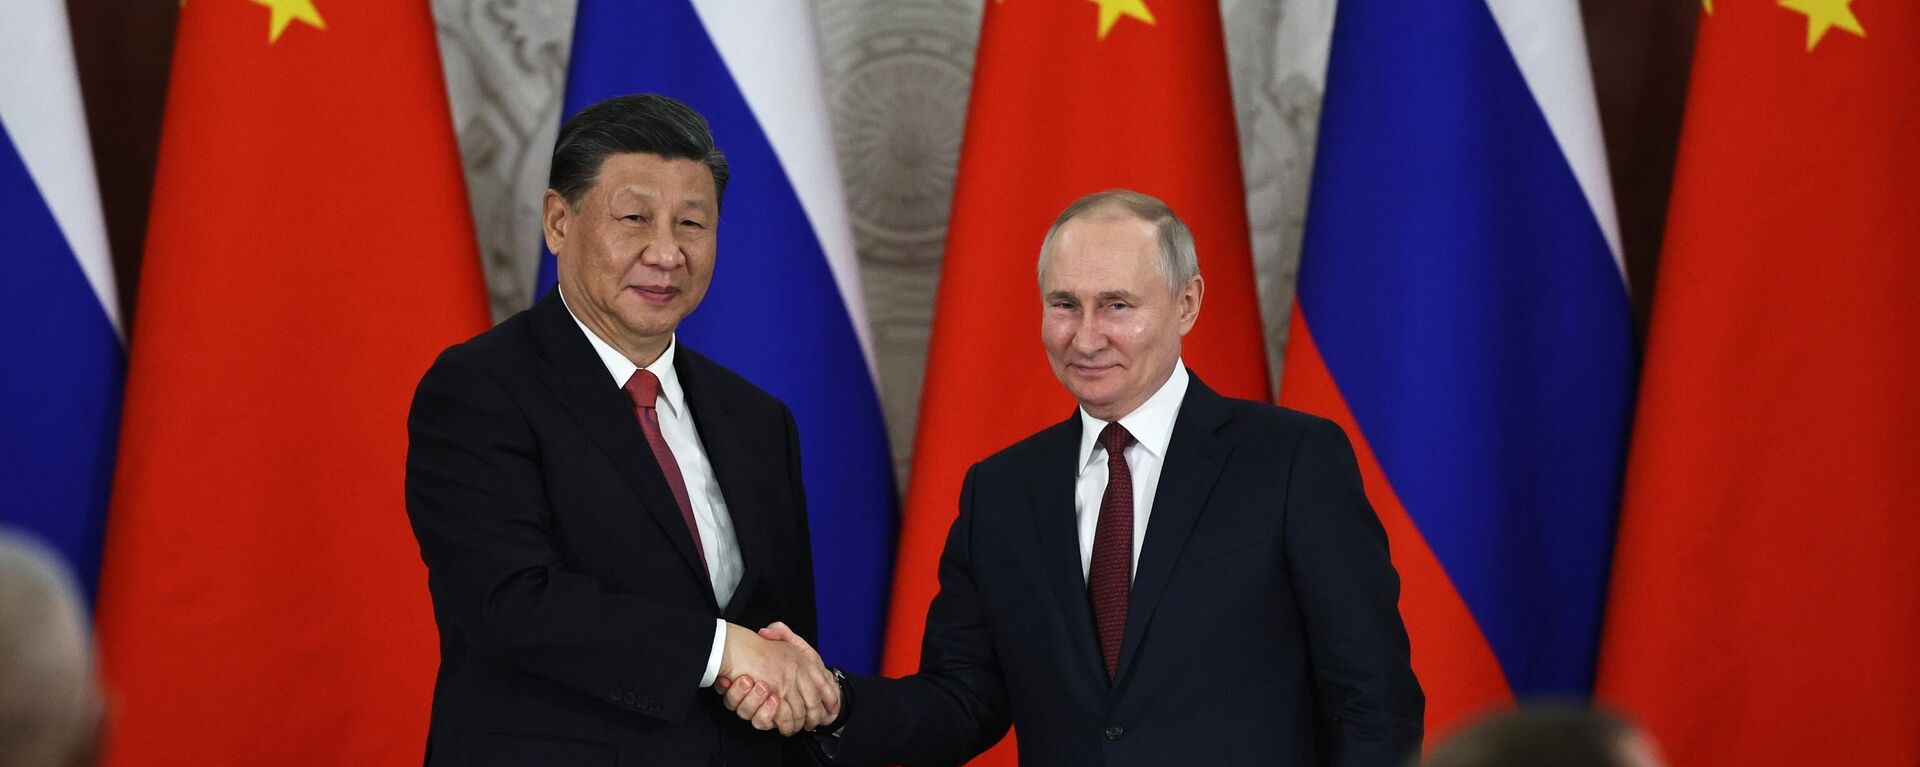 Russian President Vladimir Putin, right, and Chinese President Xi Jinping shake hands after speaking to the media during a signing ceremony following their talks at The Grand Kremlin Palace, in Moscow, Russia, March 21, 2023 - Sputnik International, 1920, 14.05.2024